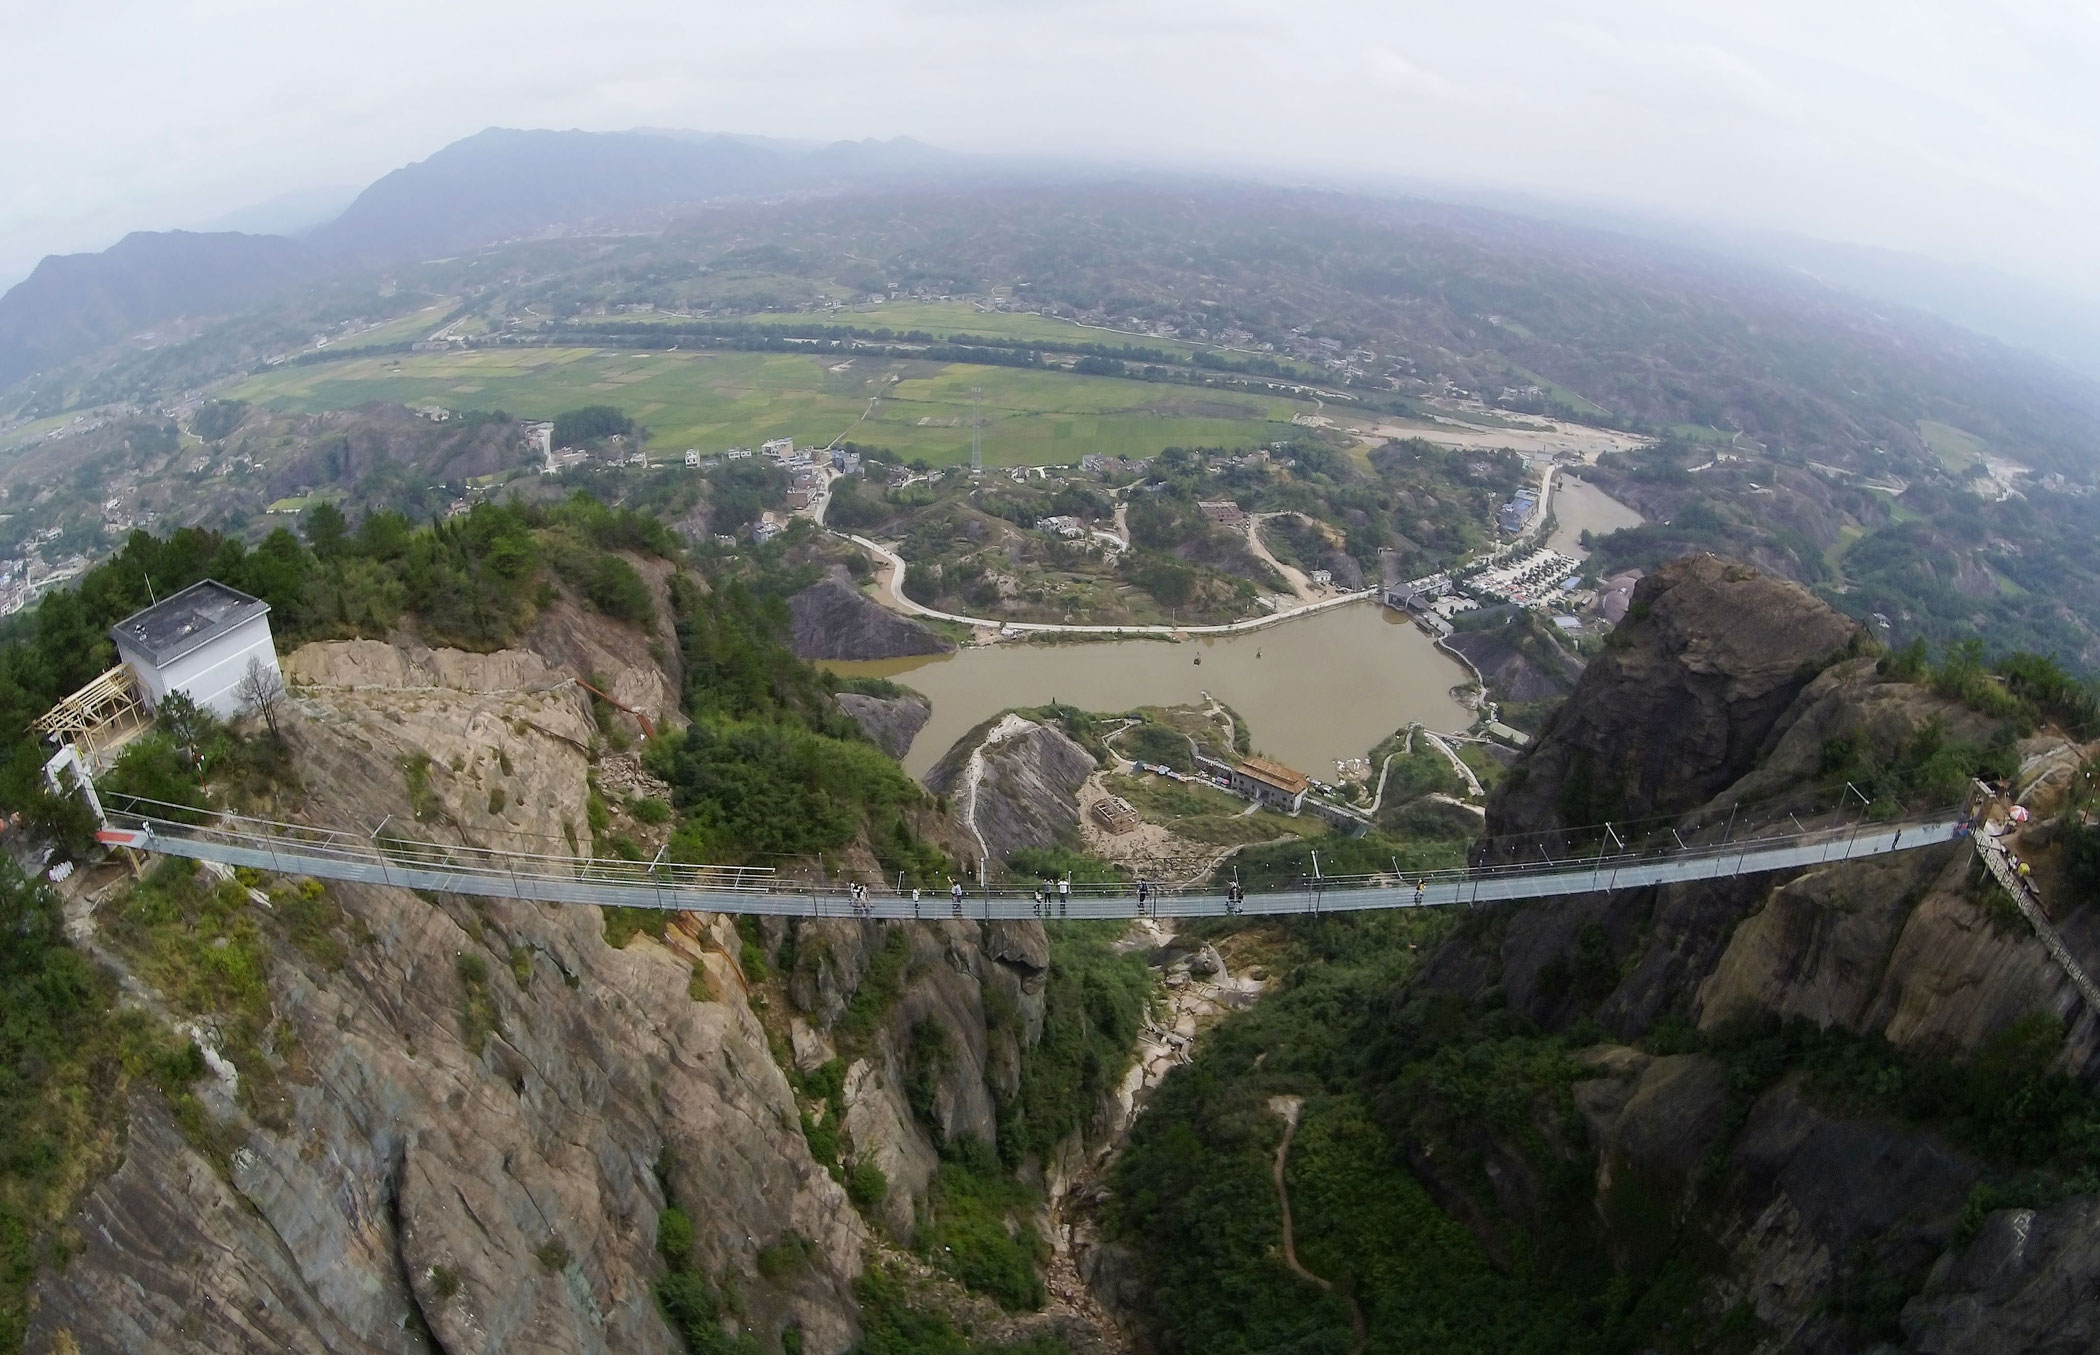 PINGJIANG, CHINA - SEPTEMBER 24:  (CHINA OUT) Tourists walk on a suspension bridge made of glass at the Shiniuzhai National Geological Park on September 24, 2015 in Pingjiang County, China. The 300-meter-long glass suspension bridge, with a maximum height of 180 meters, opened to the public on Thursday.  (Photo by ChinaFotoPress/ChinaFotoPress via Getty Images)